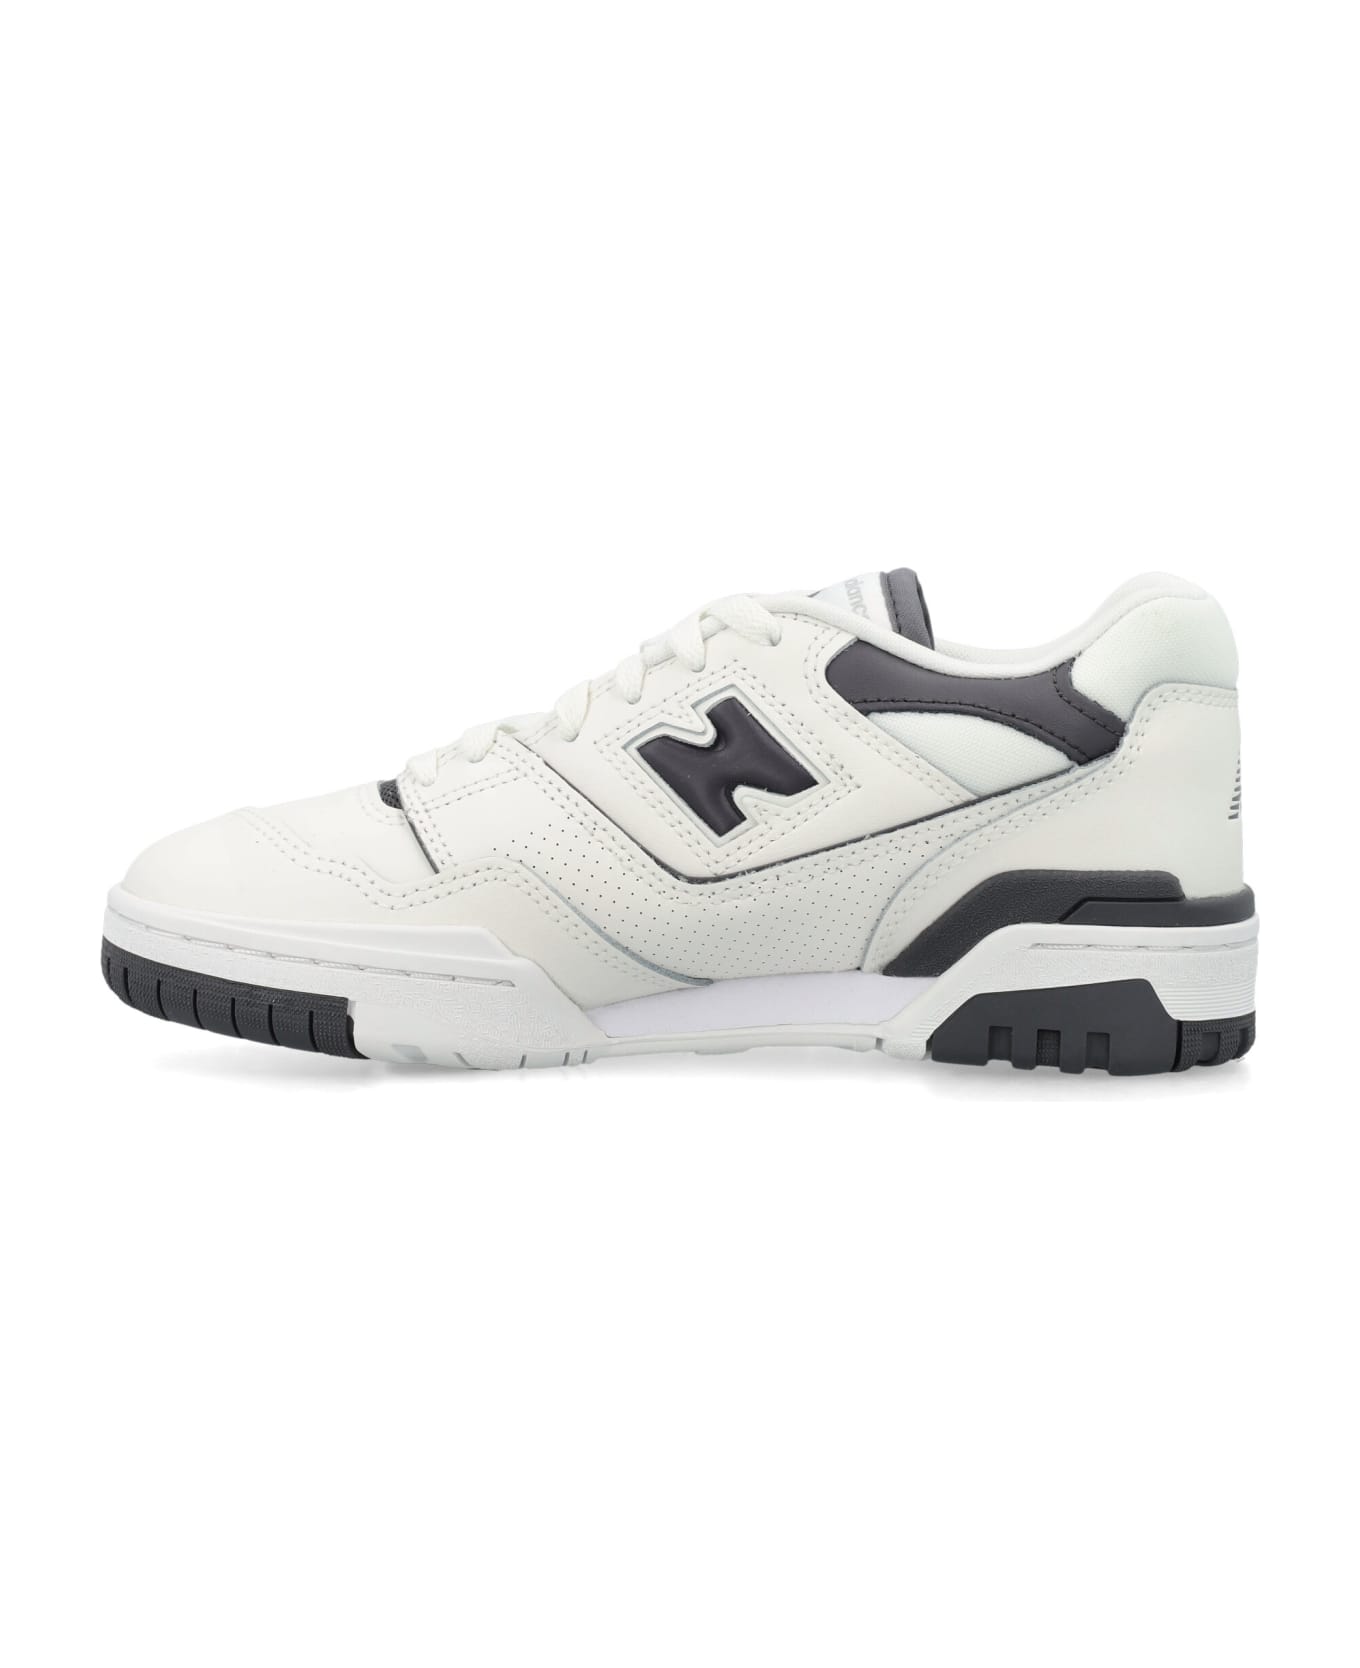 New Balance 550 Woman's Sneakers - WHITE